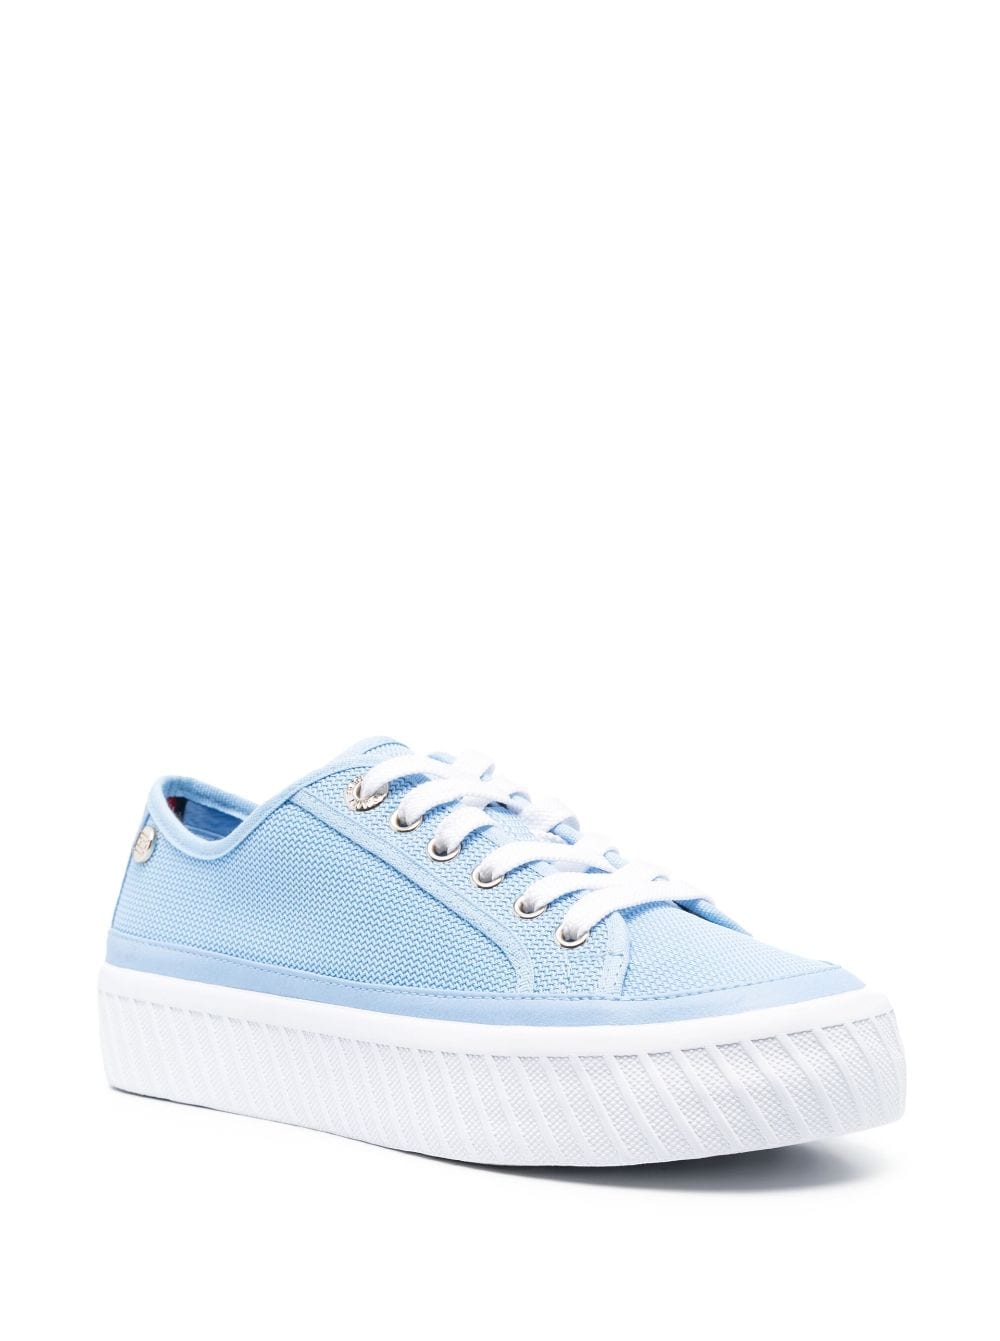 Tommy Hilfiger Sneakers met plateauzool - Blauw